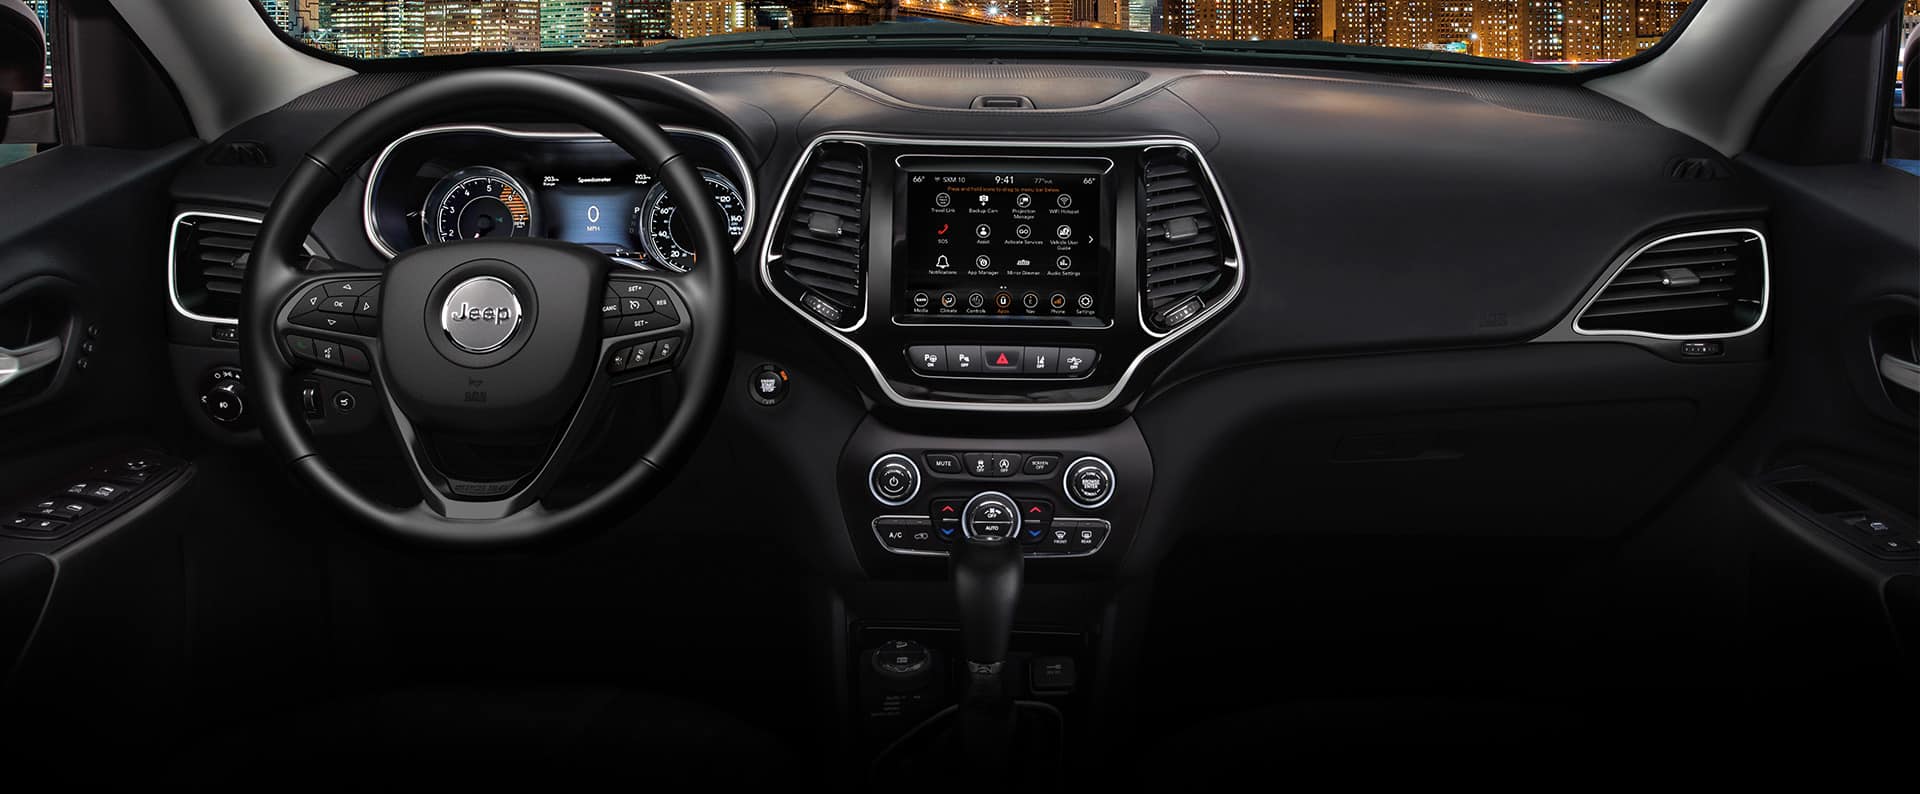 The interior of the 2023 Jeep Cherokee Altitude Lux focusing on the steering wheel, Digital Cluster Display, Uconnect touchscreen and center stack controls.